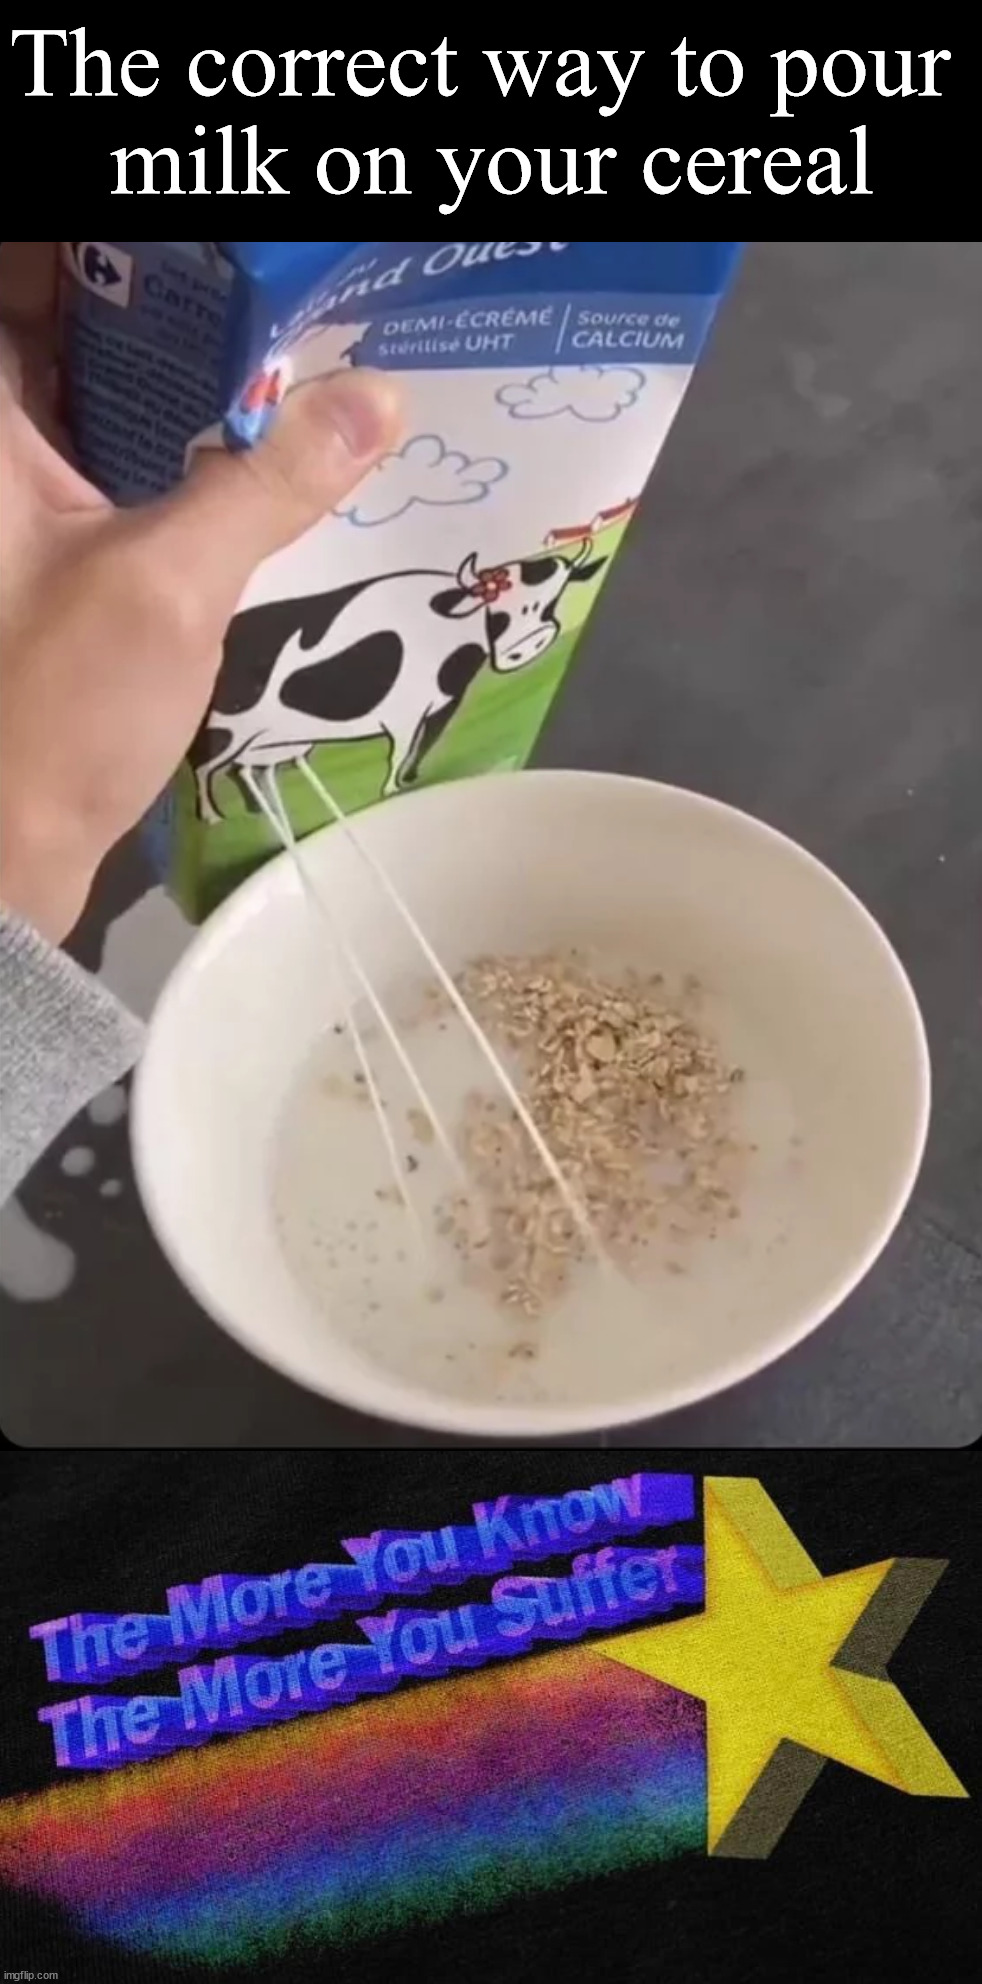 The correct way to pour milk | The correct way to pour 
milk on your cereal | image tagged in milk,milk carton,pouring,cereal,choccy milk | made w/ Imgflip meme maker